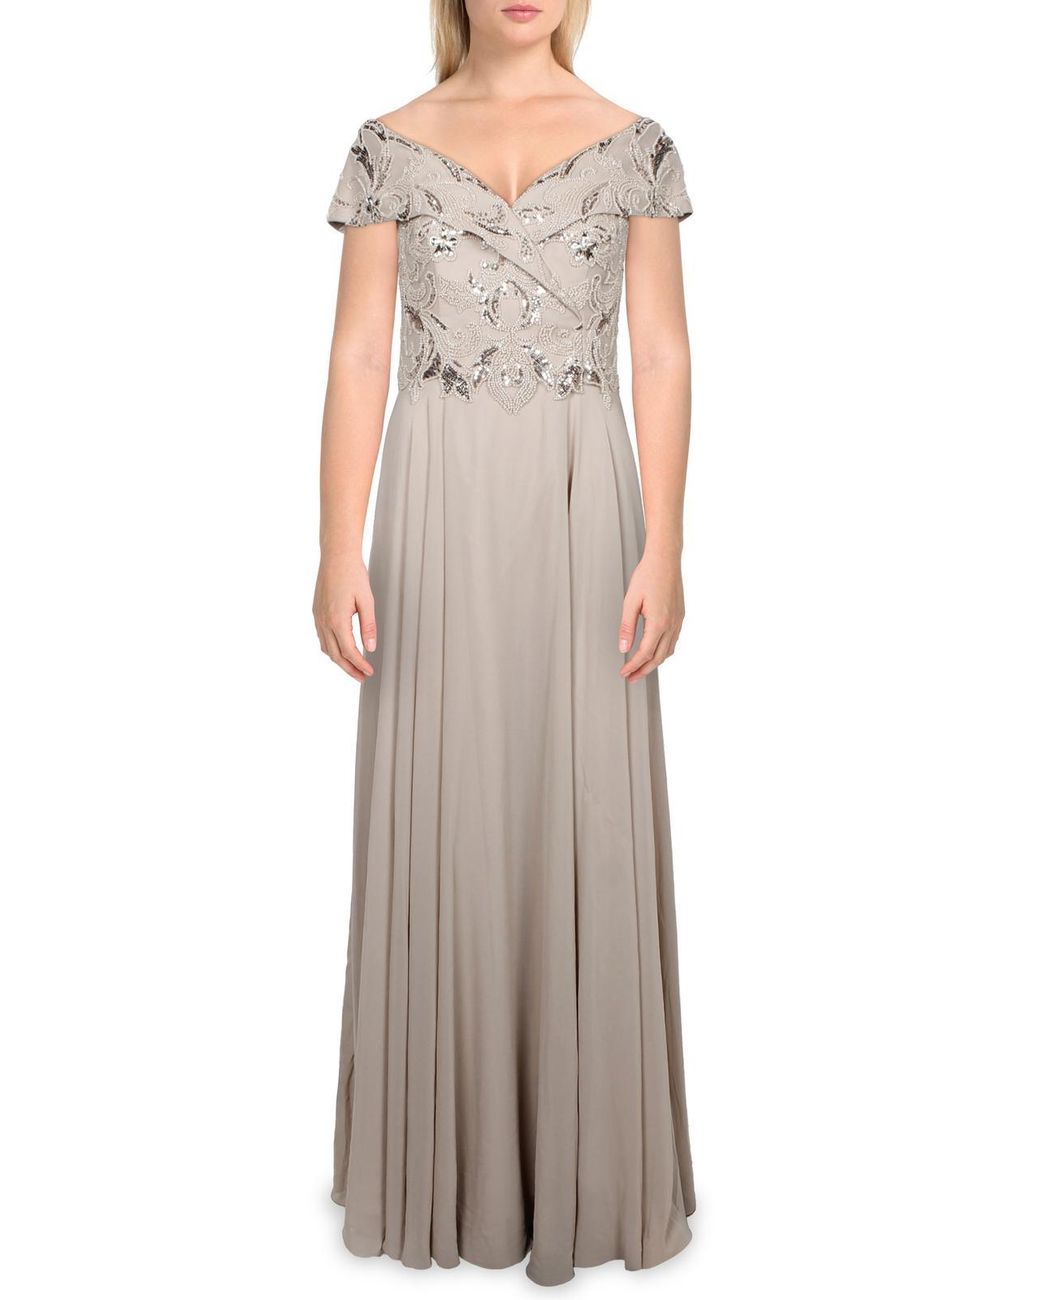 Xscape Chiffon Embellished Evening Dress in Gray | Lyst